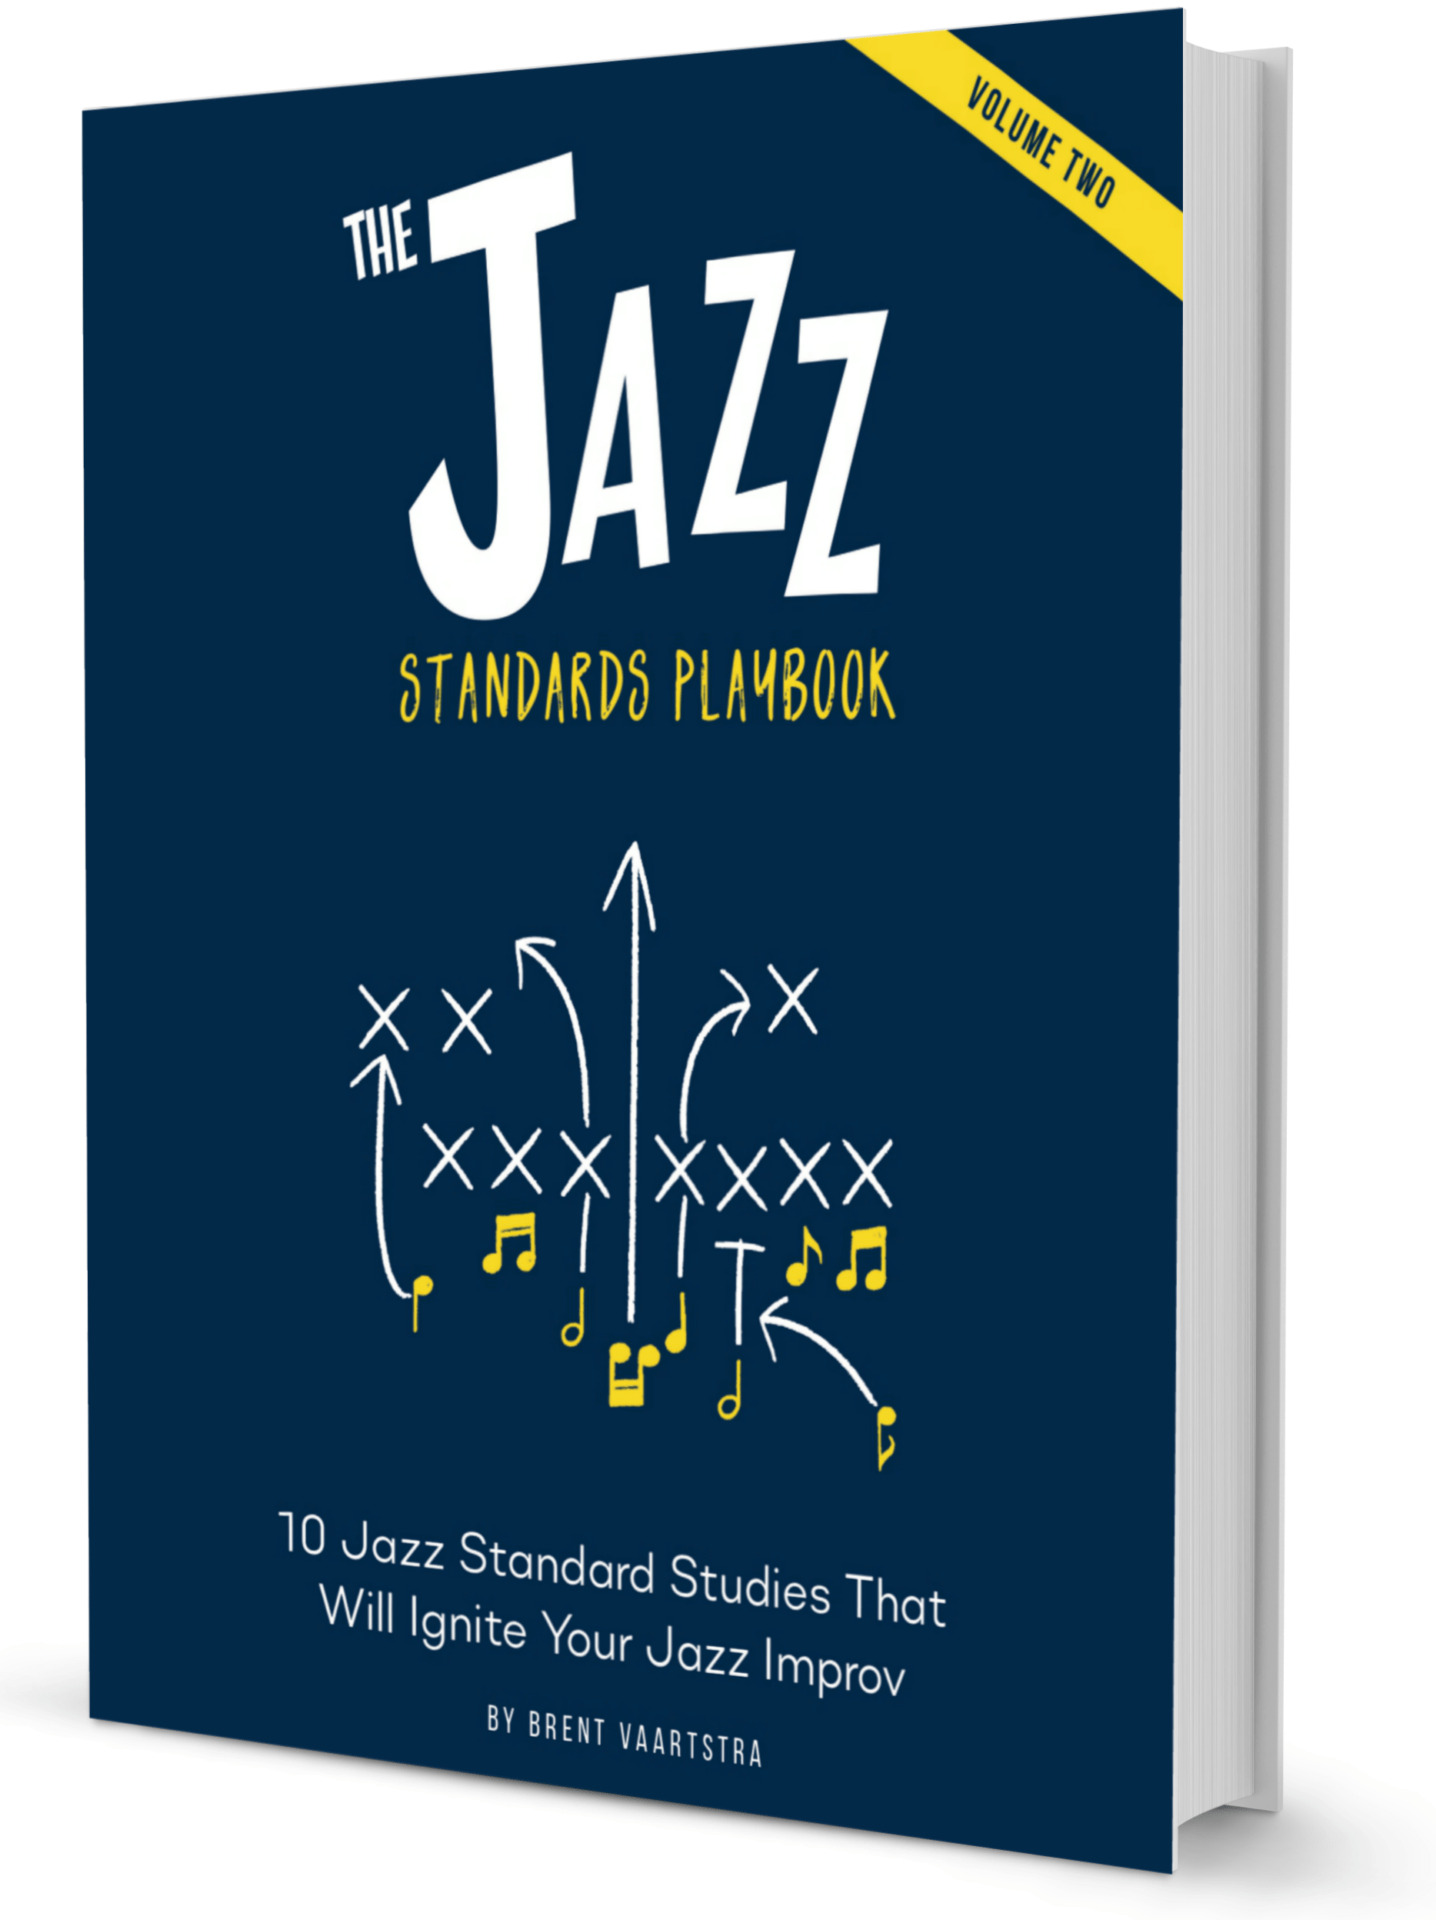 The Jazz Standards Playbook Vol 2 Cover 1